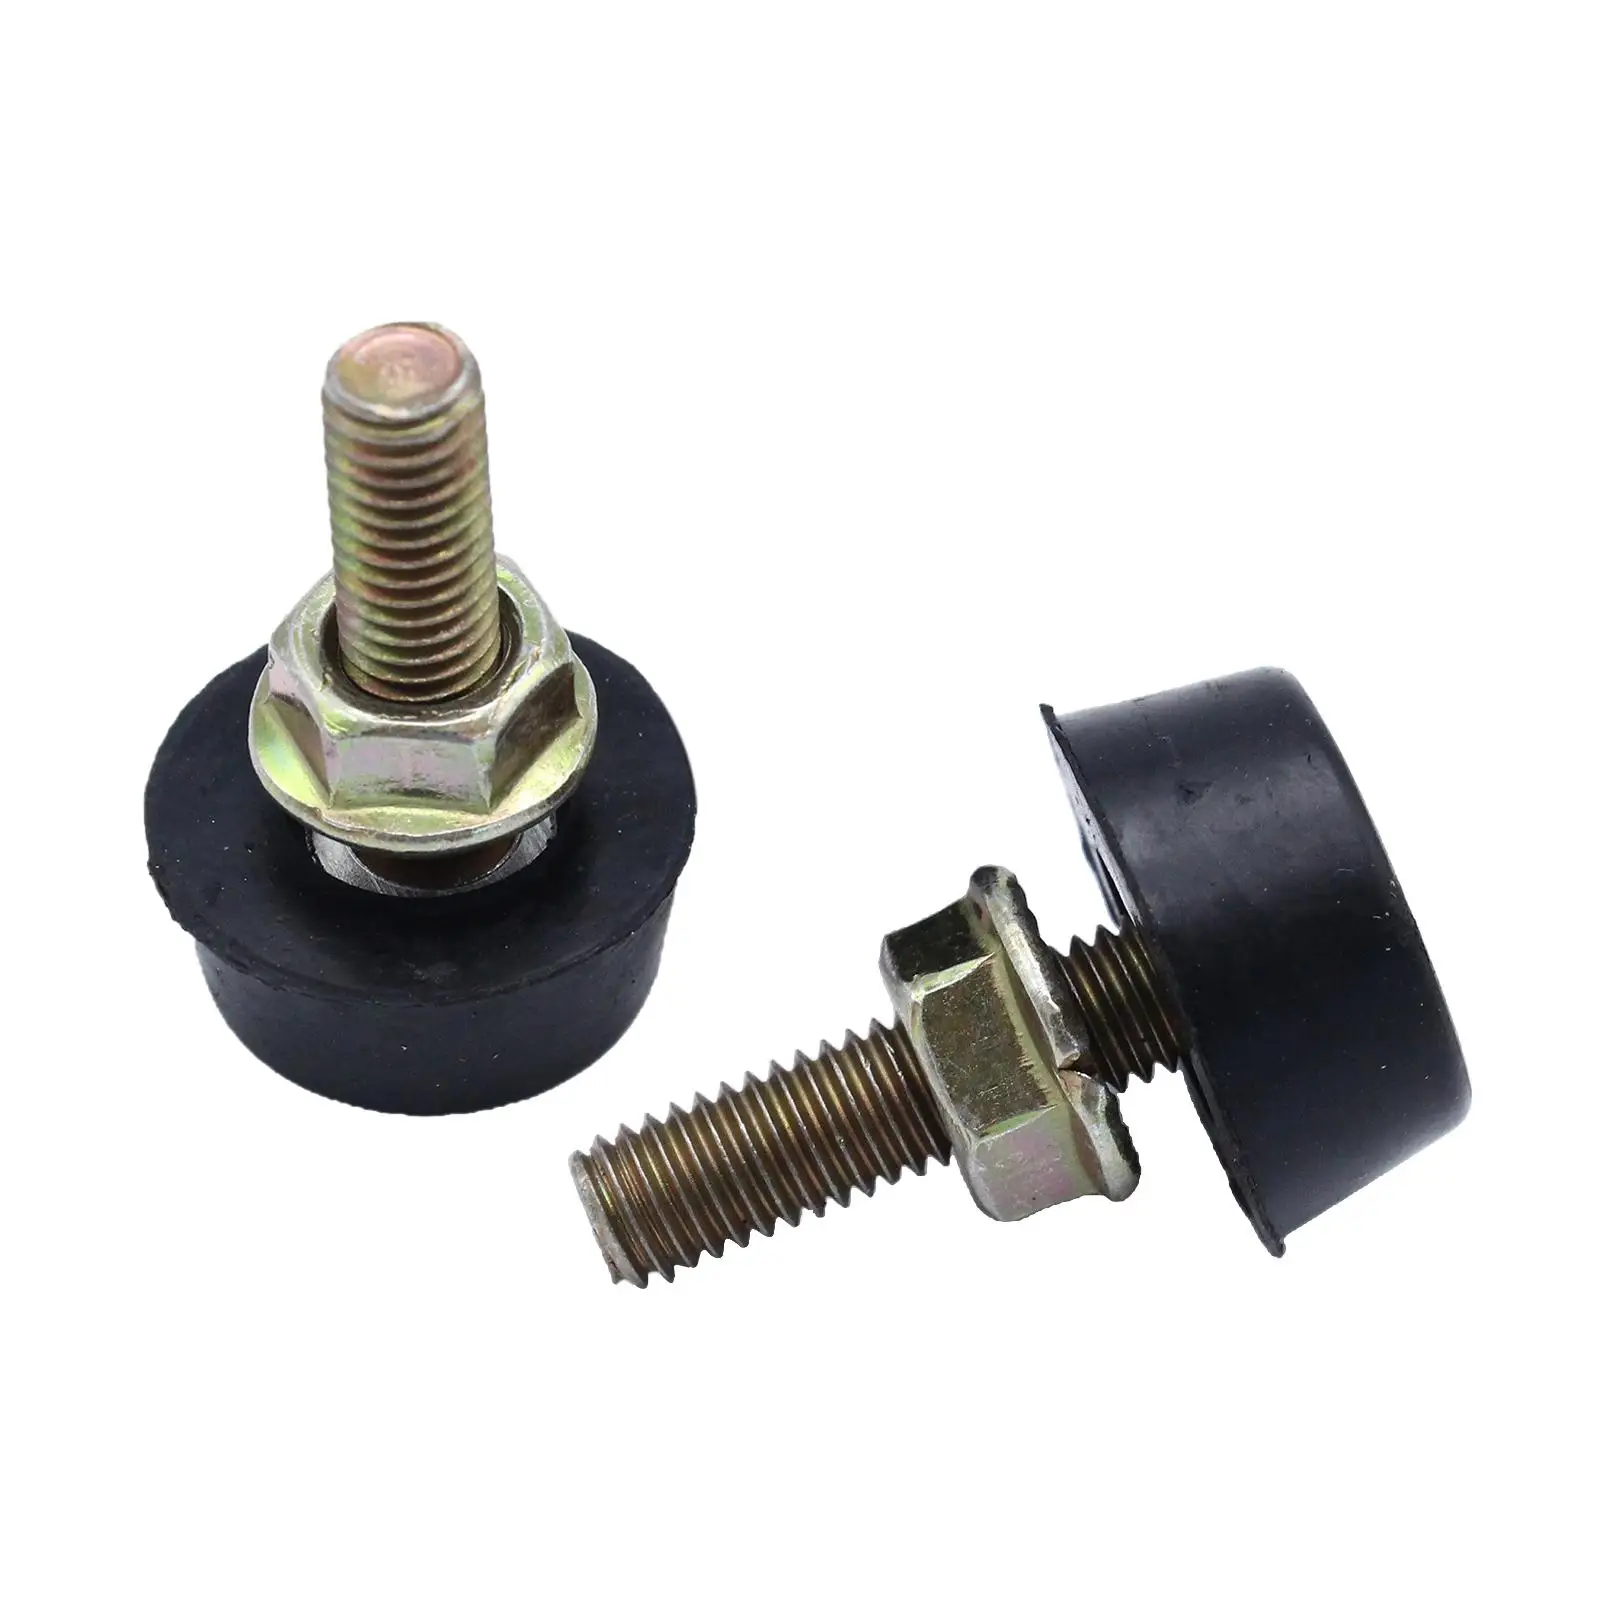 Hood Bonnet Stop Adjuster Replaces for  Patrol GQ 628400 Compact